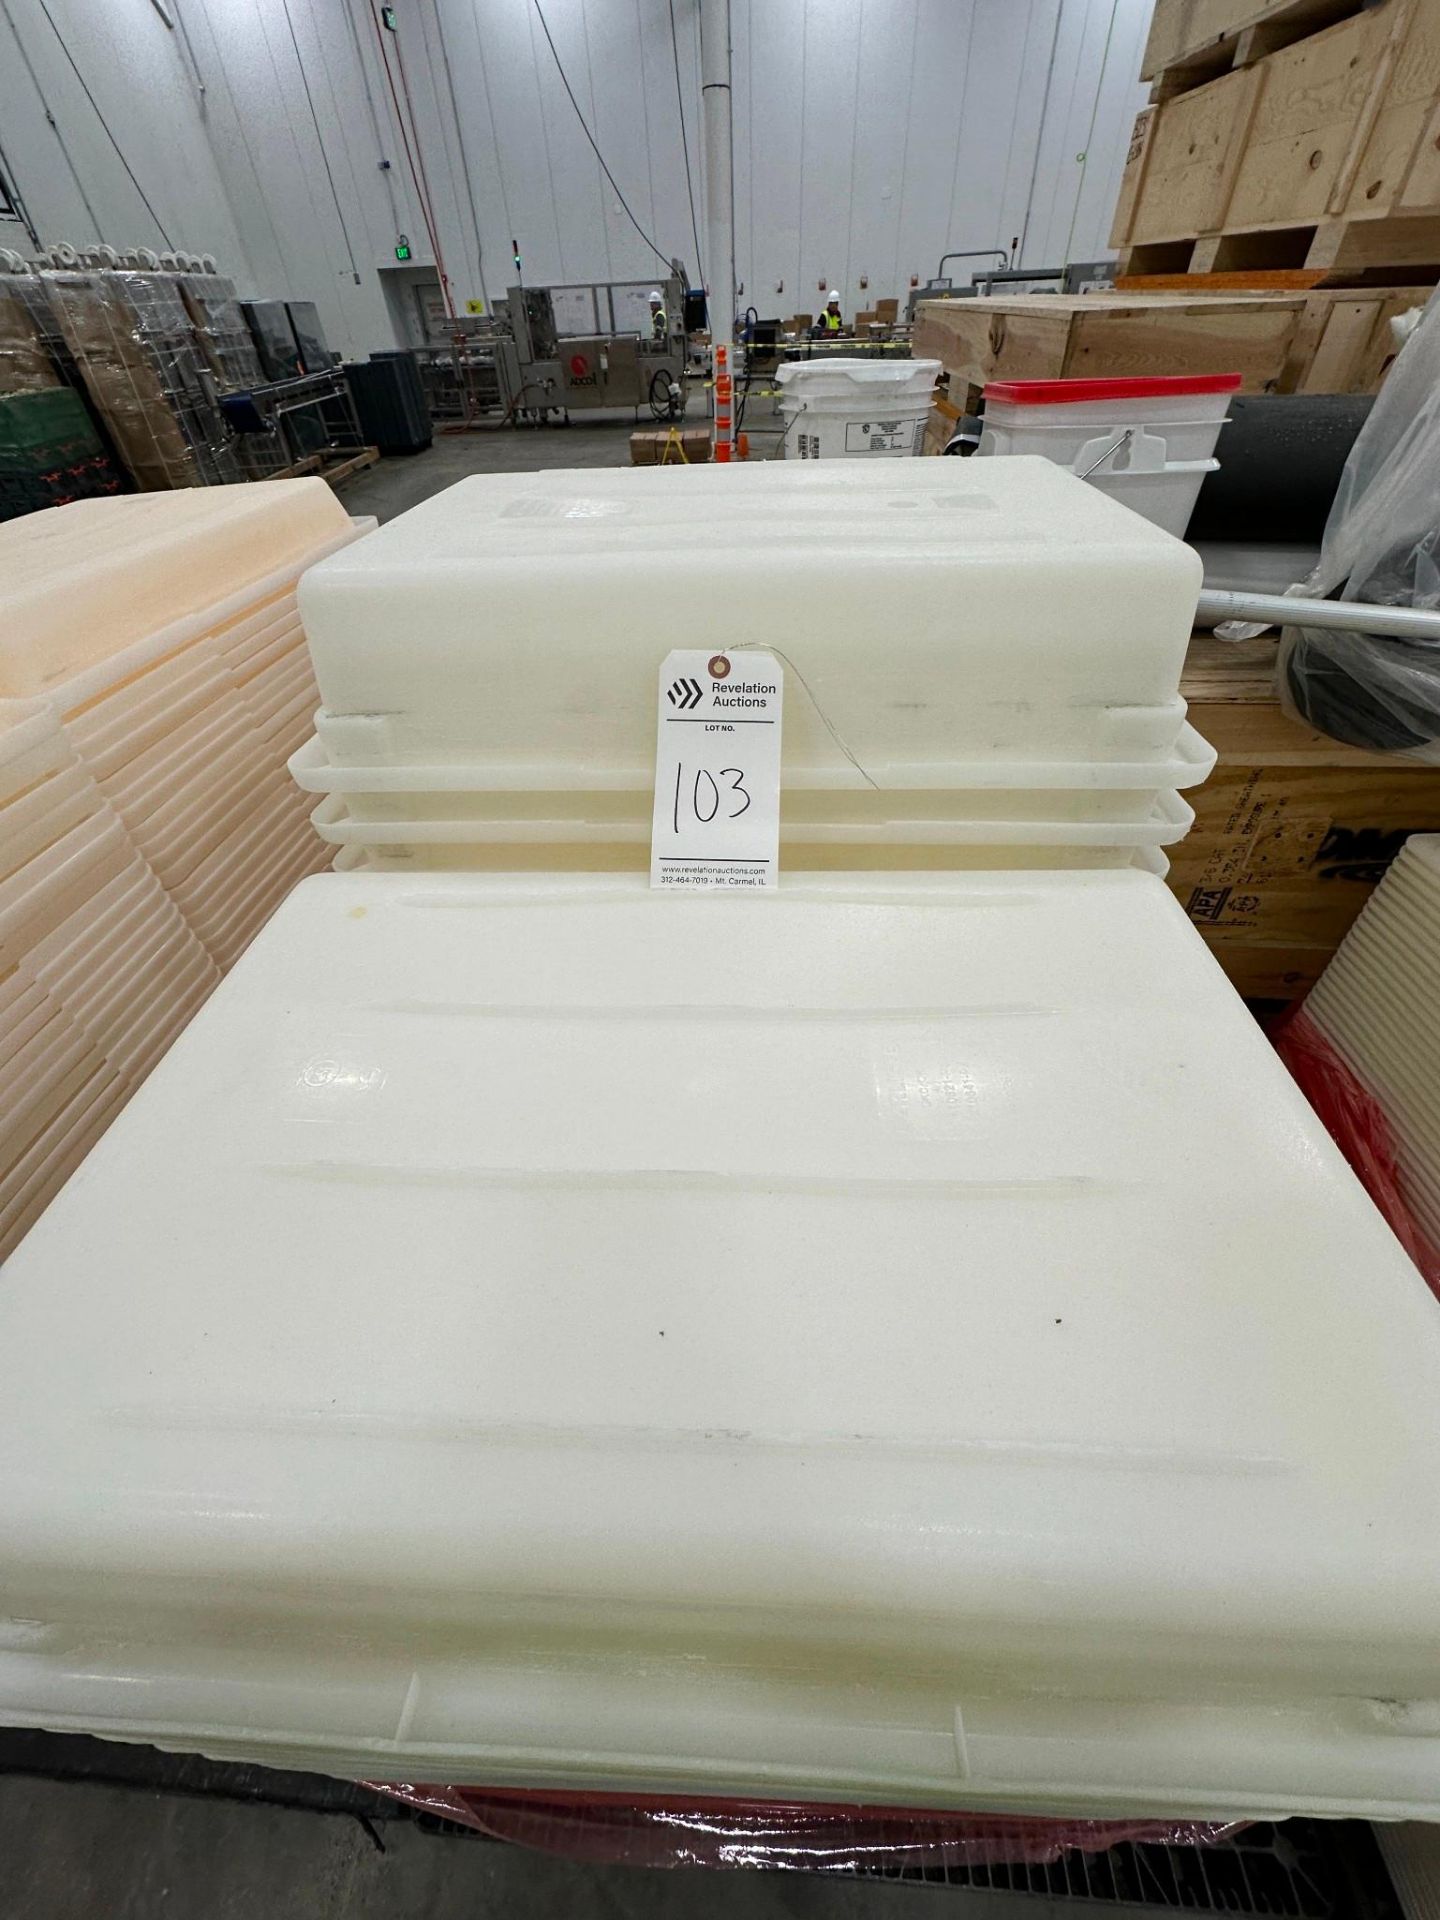 SKID OF FLAT AND PERFORATED PLASTIC TRAYS